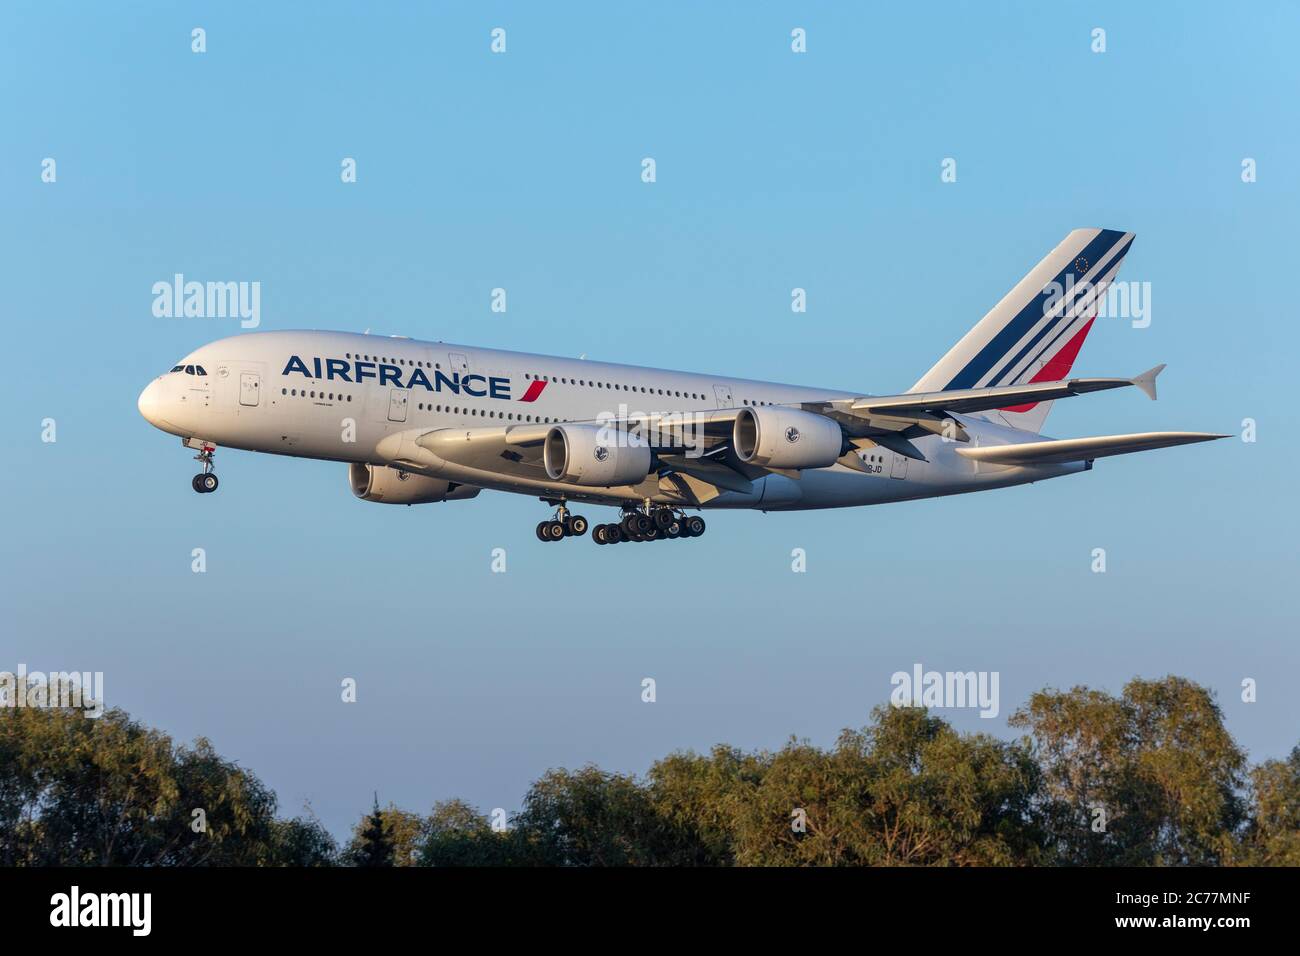 Air France Airbus A380-861 (F-HPJD) bei Ankunft in Malta. Stockfoto